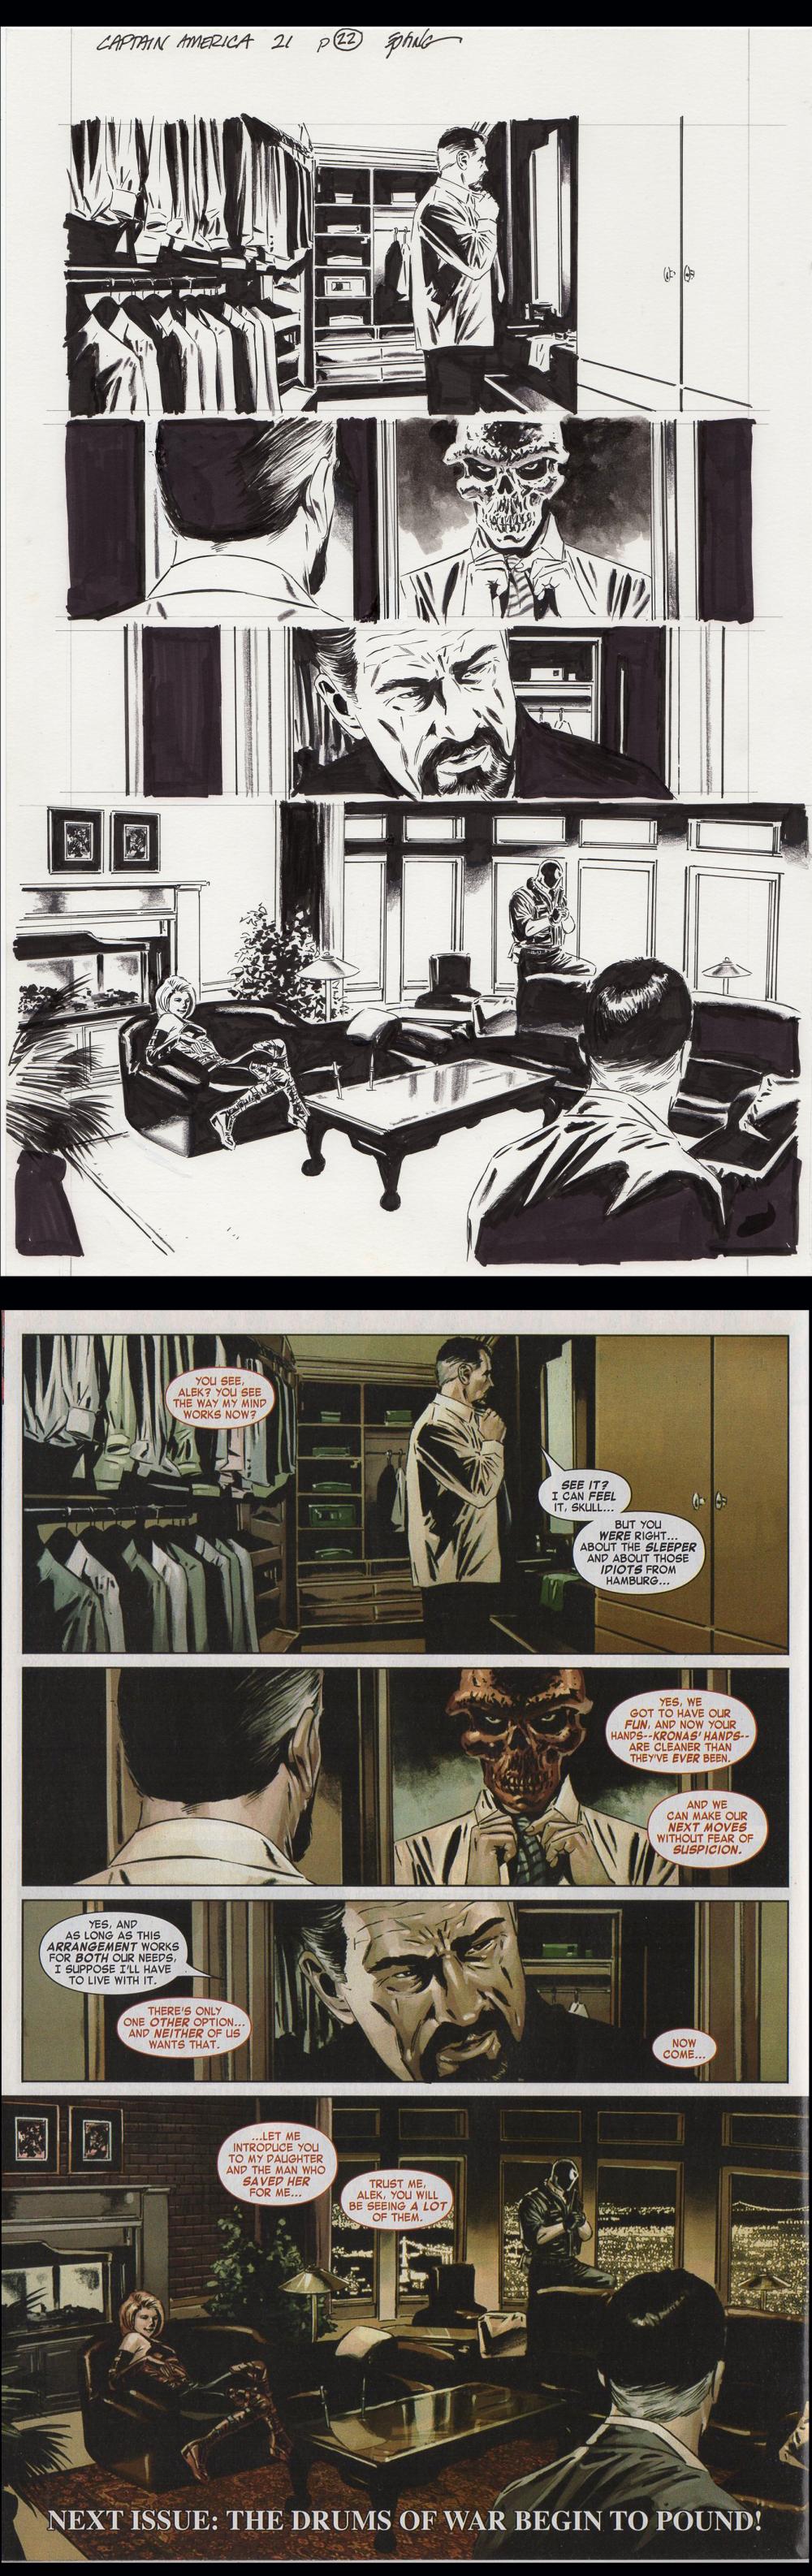 Image: Captain America Vol 5 #21 page 22 art by Steve Epting